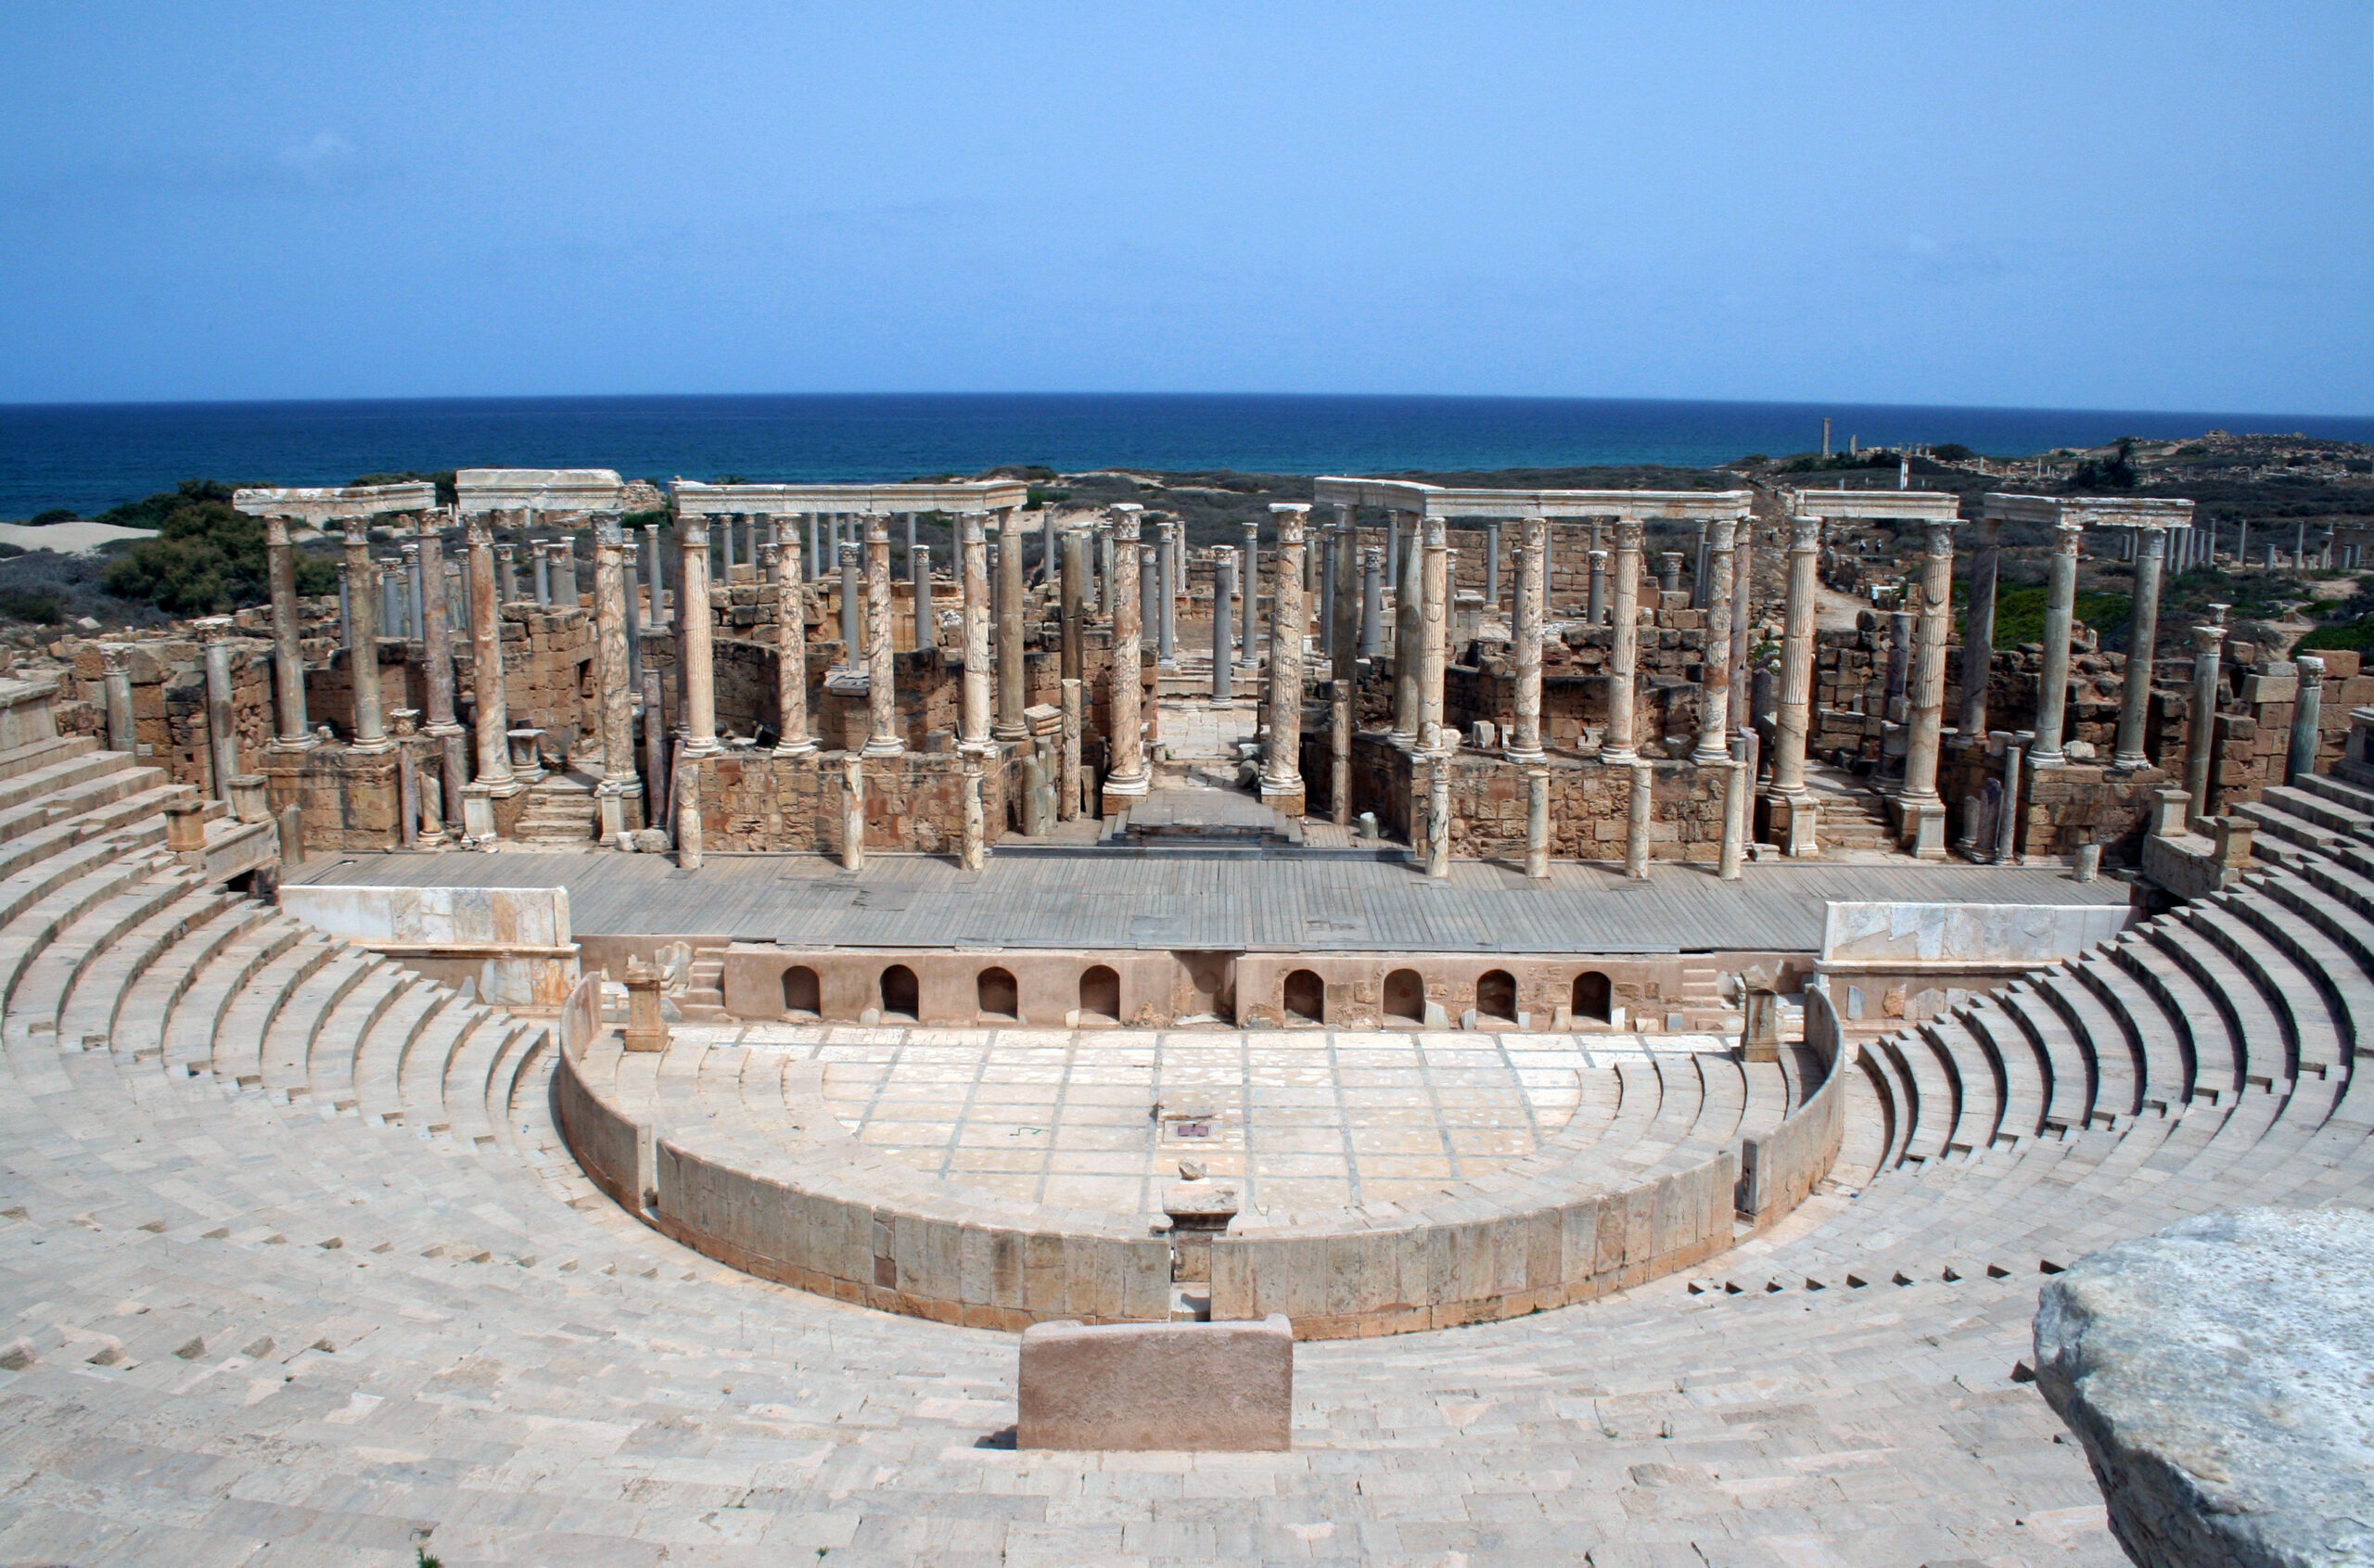 Khoms (Lepcis Magna), birthplace of the emperor Septimius Severus, was listed as a UNESCO World Heritage site in 1982. Theater, Khoms (Lepcis Magna), Libya, built in 1/2 C.E. and remodeled in later centuries, 87.6 m diameter (photo: public domain)